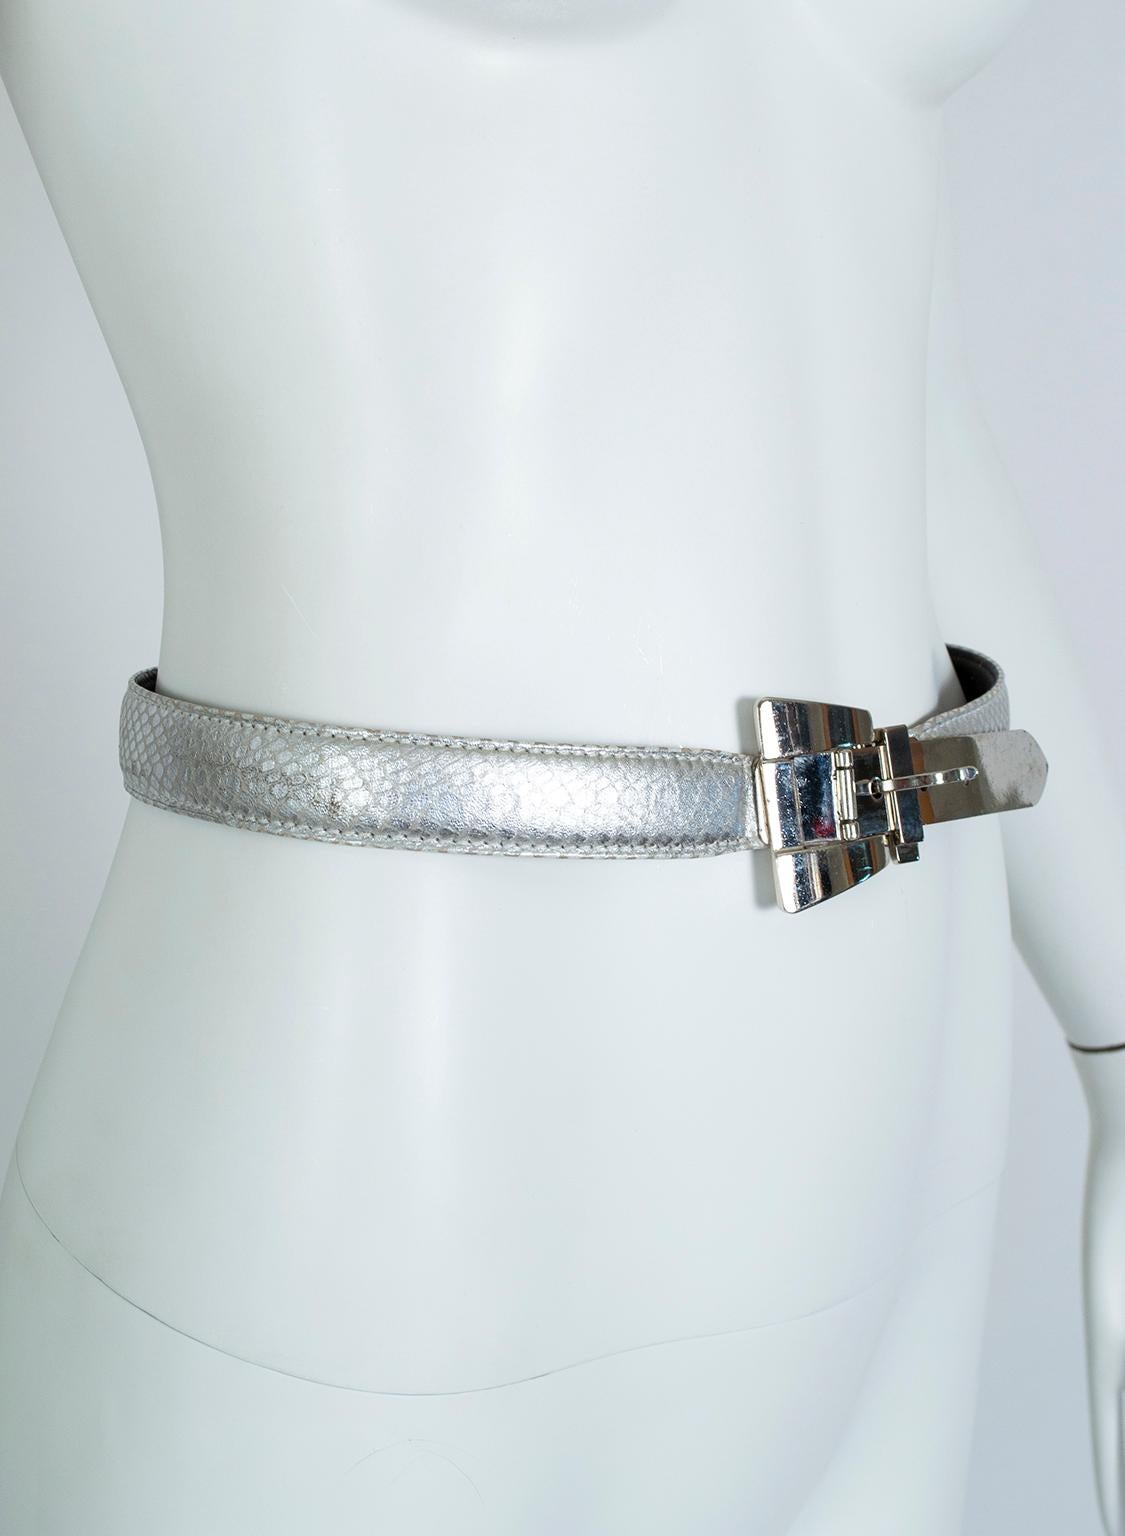 Silver leather belts are a modern neutral that--when paired with silver shoes--can make a monochrome outfit sing. This Escada model takes the idea a step further with snakeskin embossing and a unique Modernist buckle design whose metal tail fishes